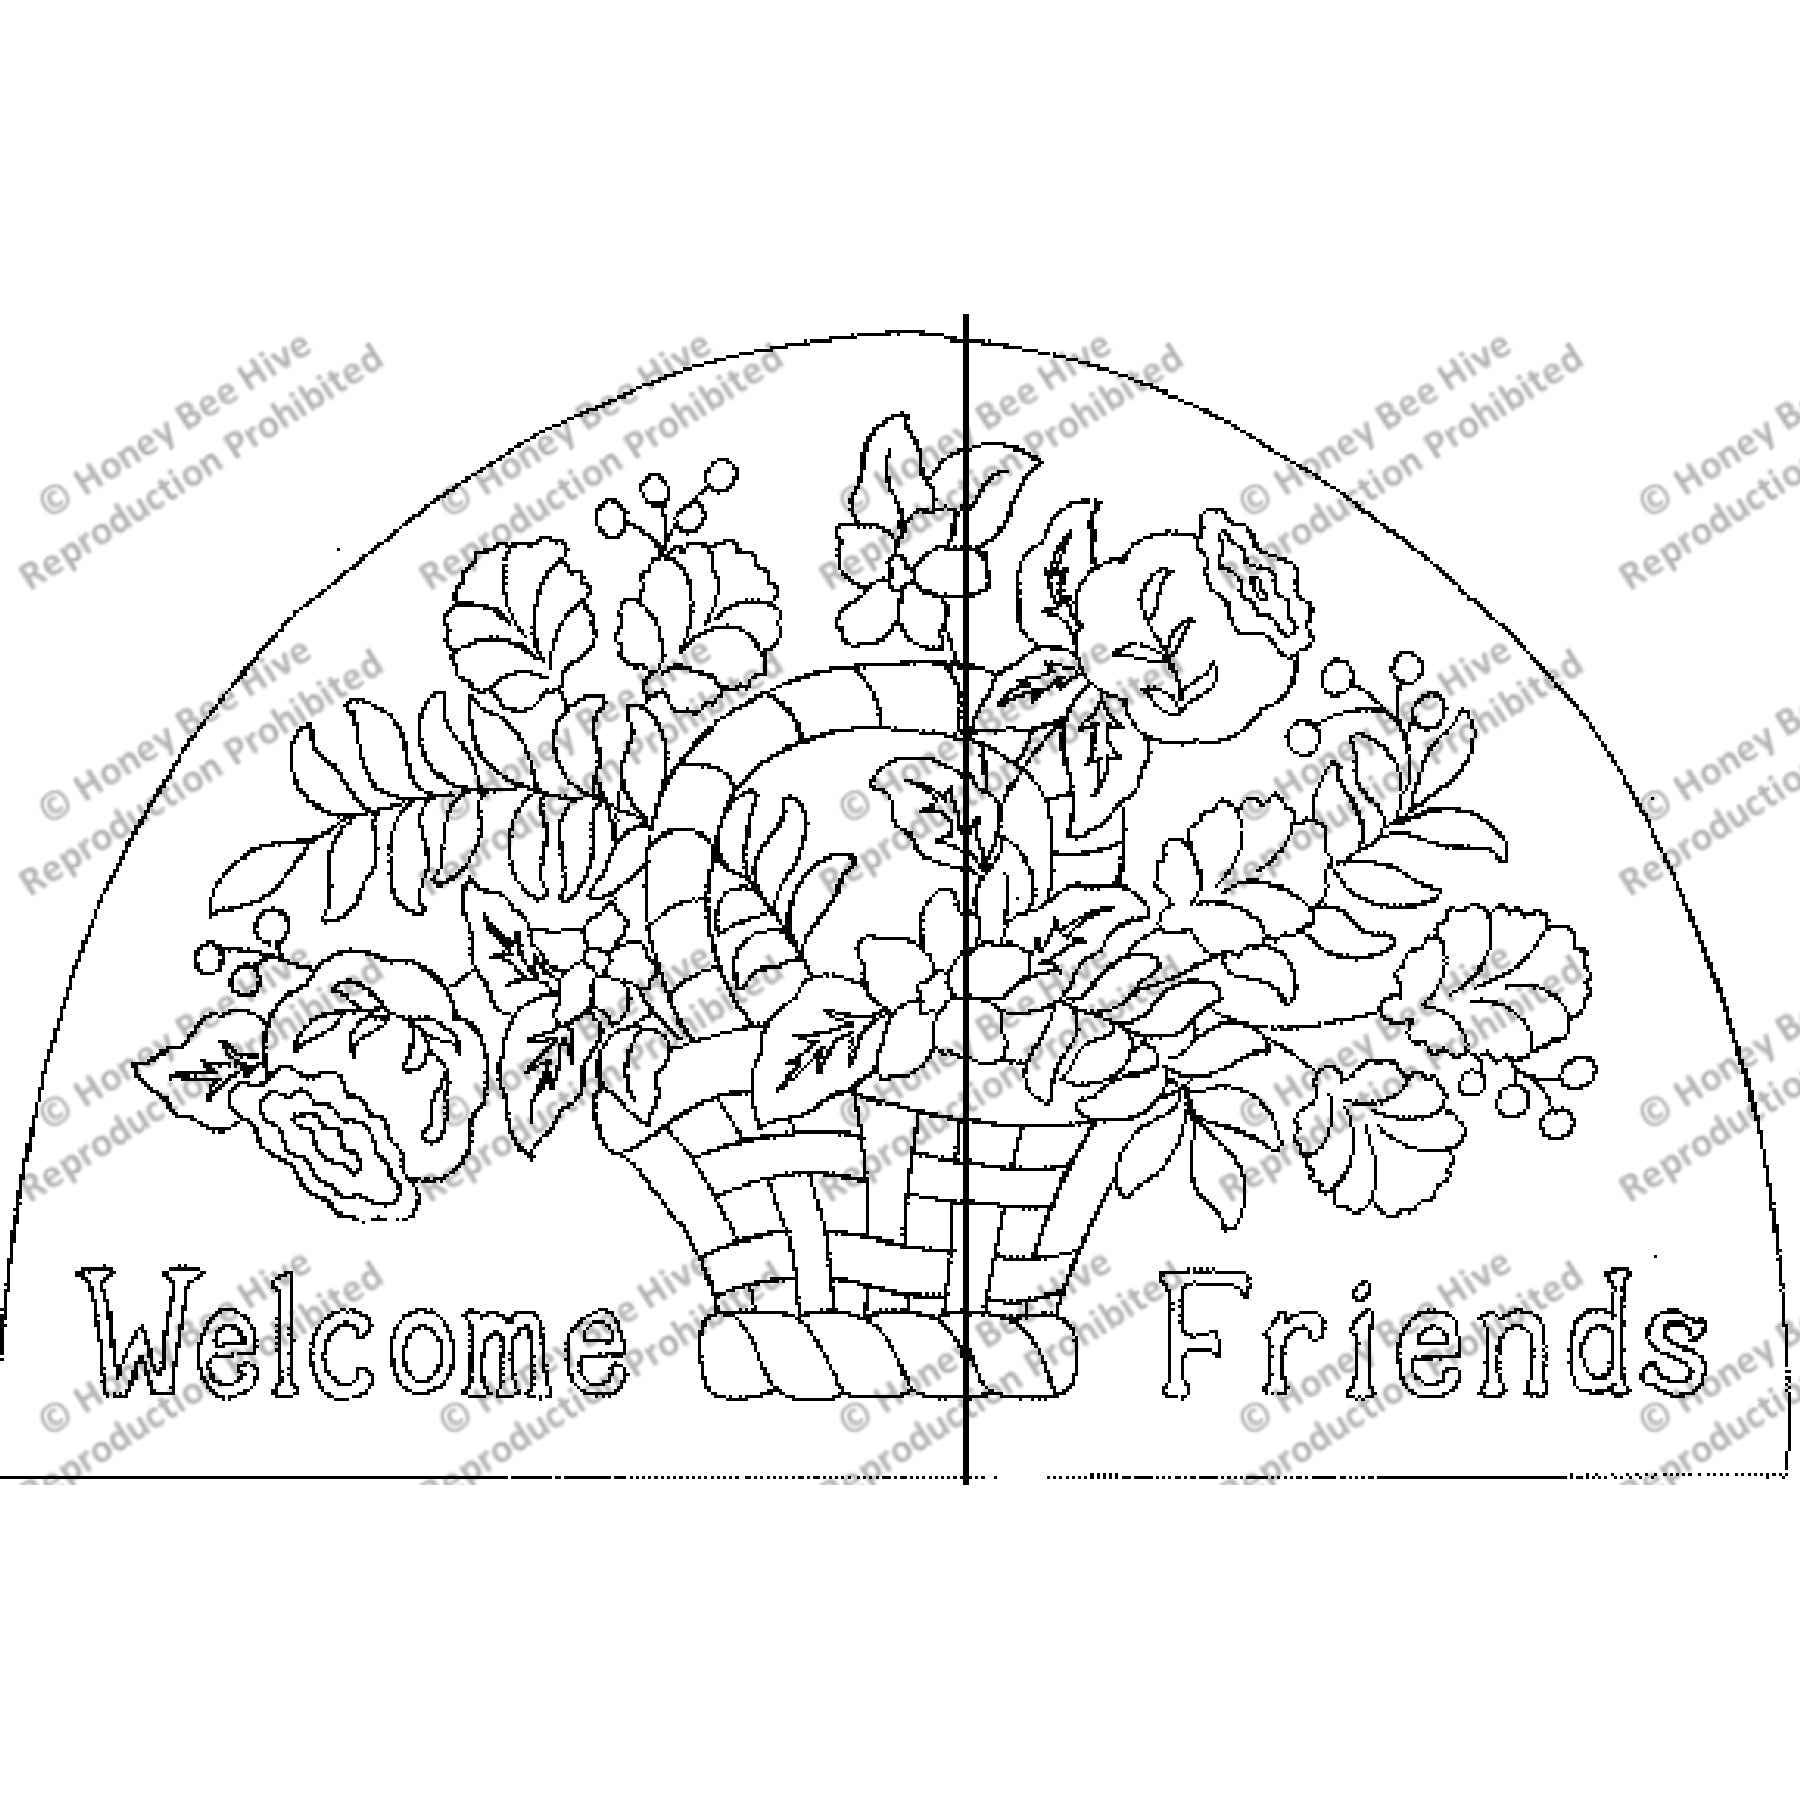 Old Fashioned Welcome, rug hooking pattern